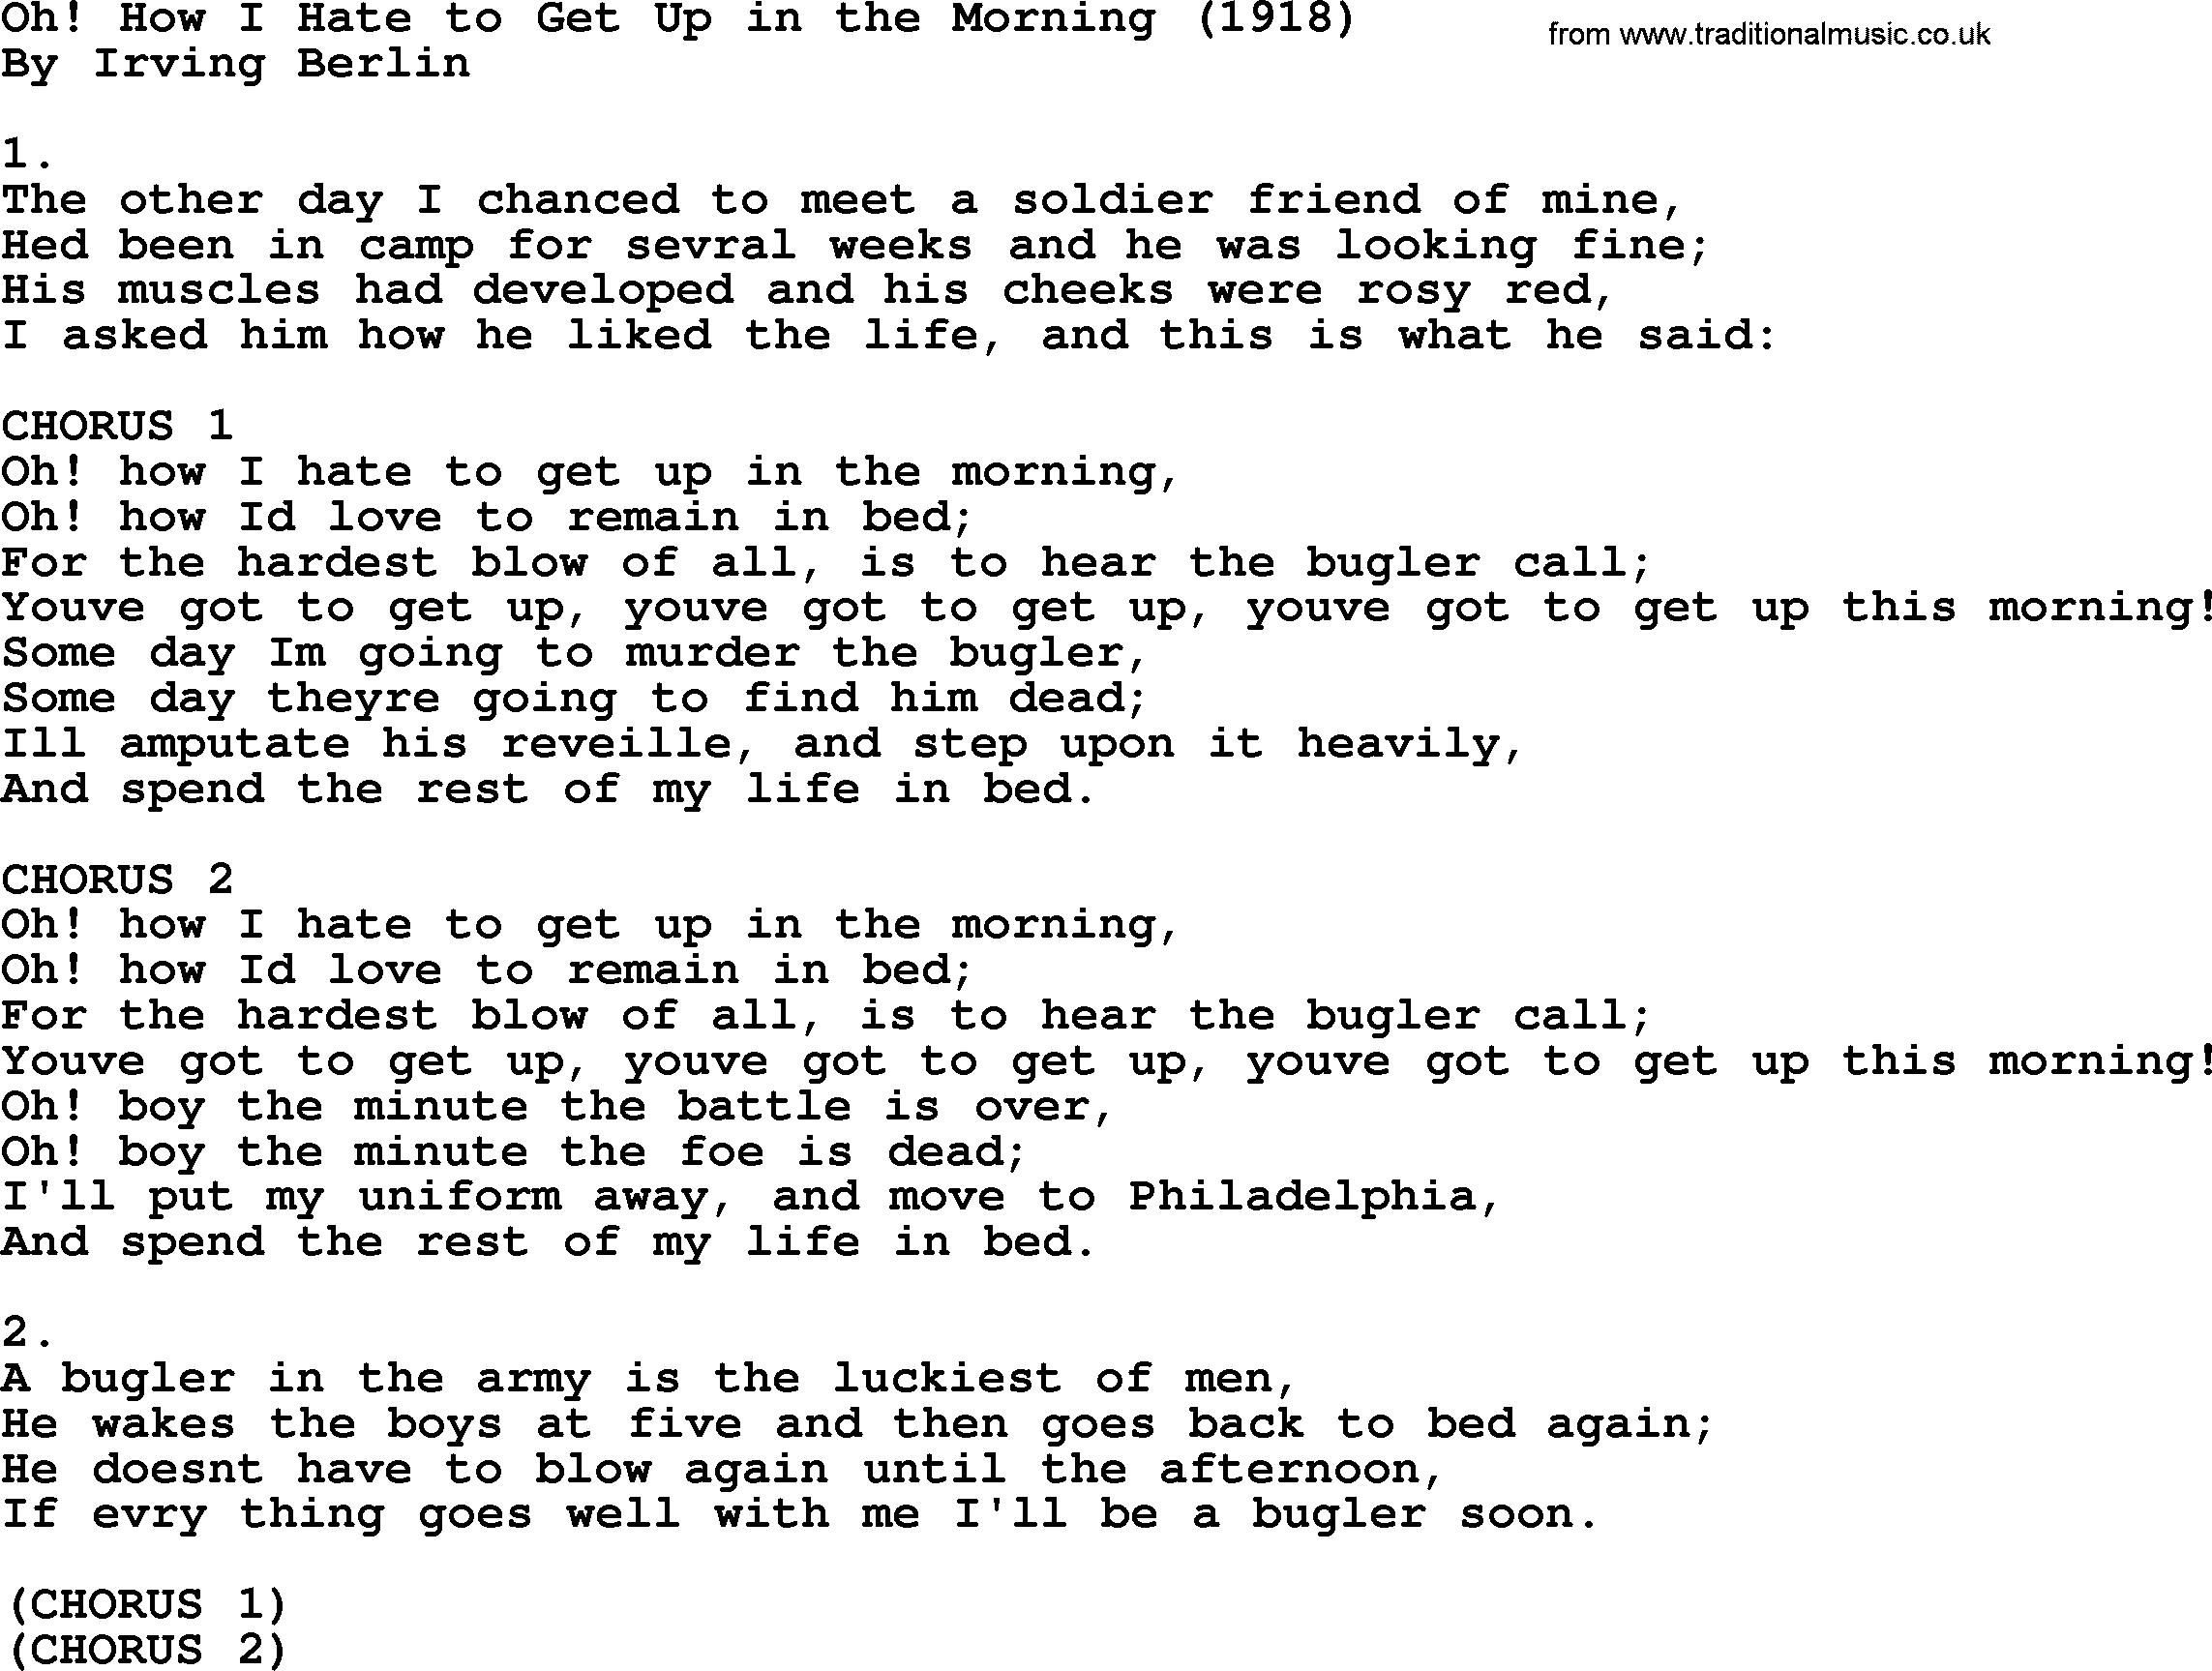 World War(WW1) One Song: Oh How I Hate To Get Up In The Morning 1918, lyrics and PDF